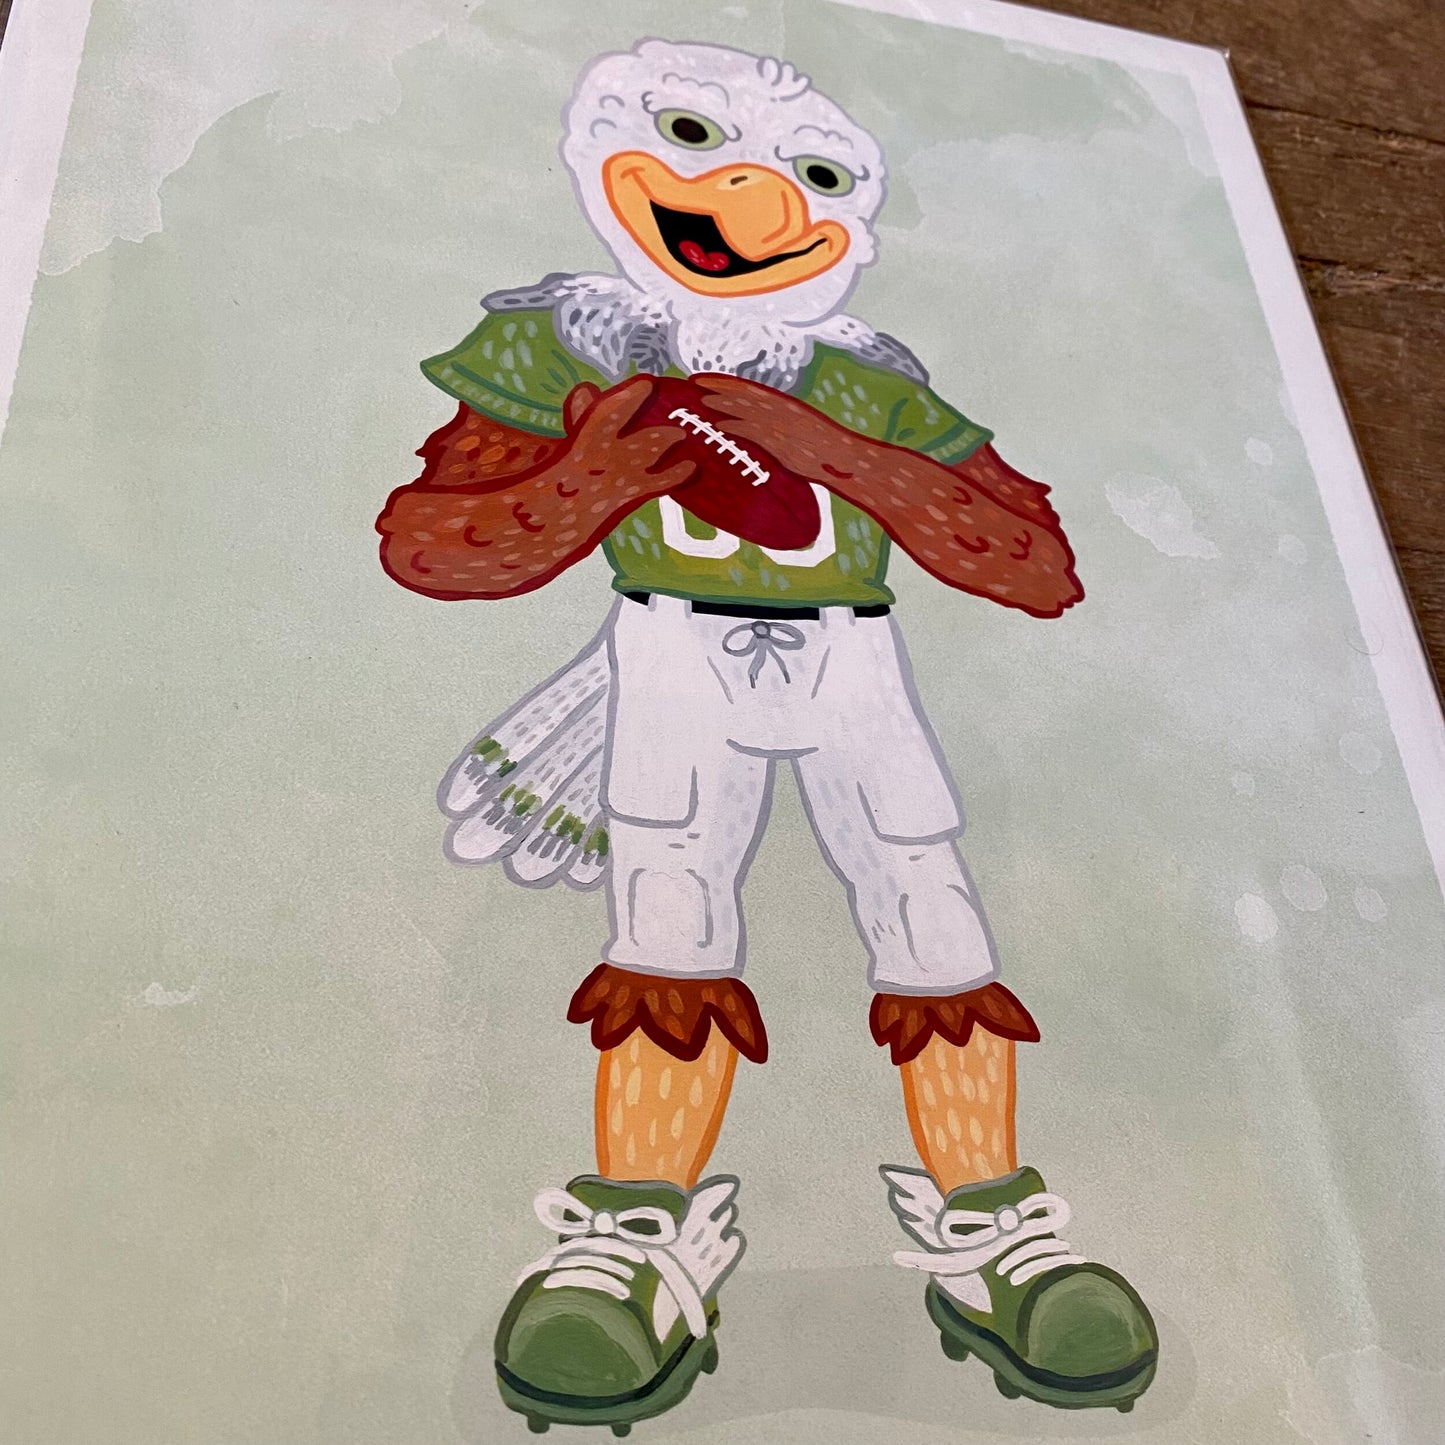 Illustration of an anthropomorphic chicken, reminiscent of the gritty style of Jamie Bendas, dressed in football attire holding a football - Philly Mascot Prints by Jamie Bendas.